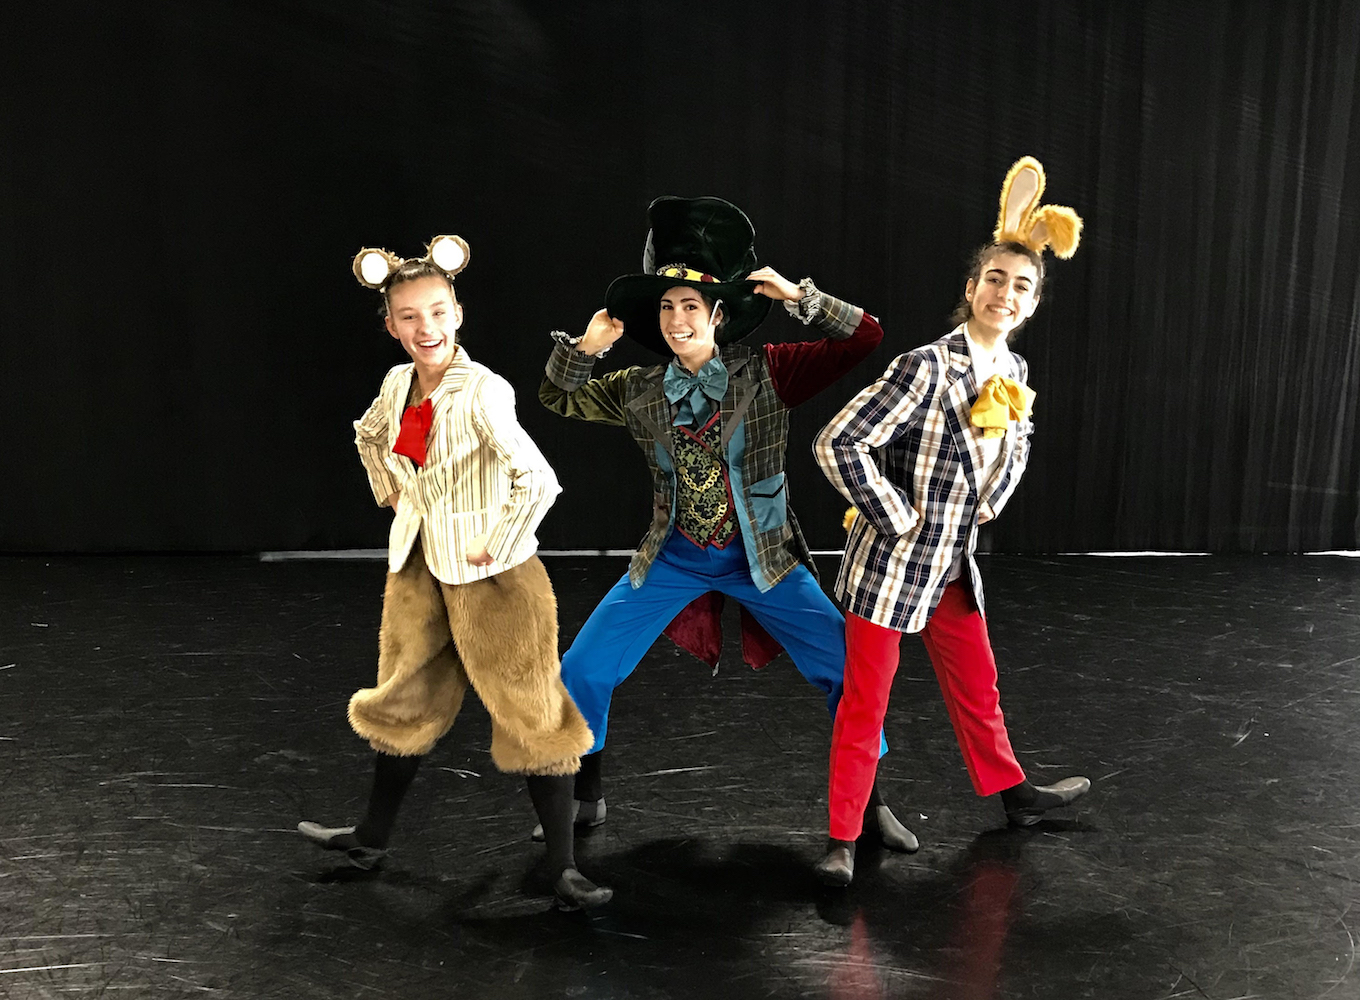 Gallery 4 - Sophie Heberlein as Dormouse, Annebeth Heller as Mad Hatter, Pardiss Kaviani as March Hare